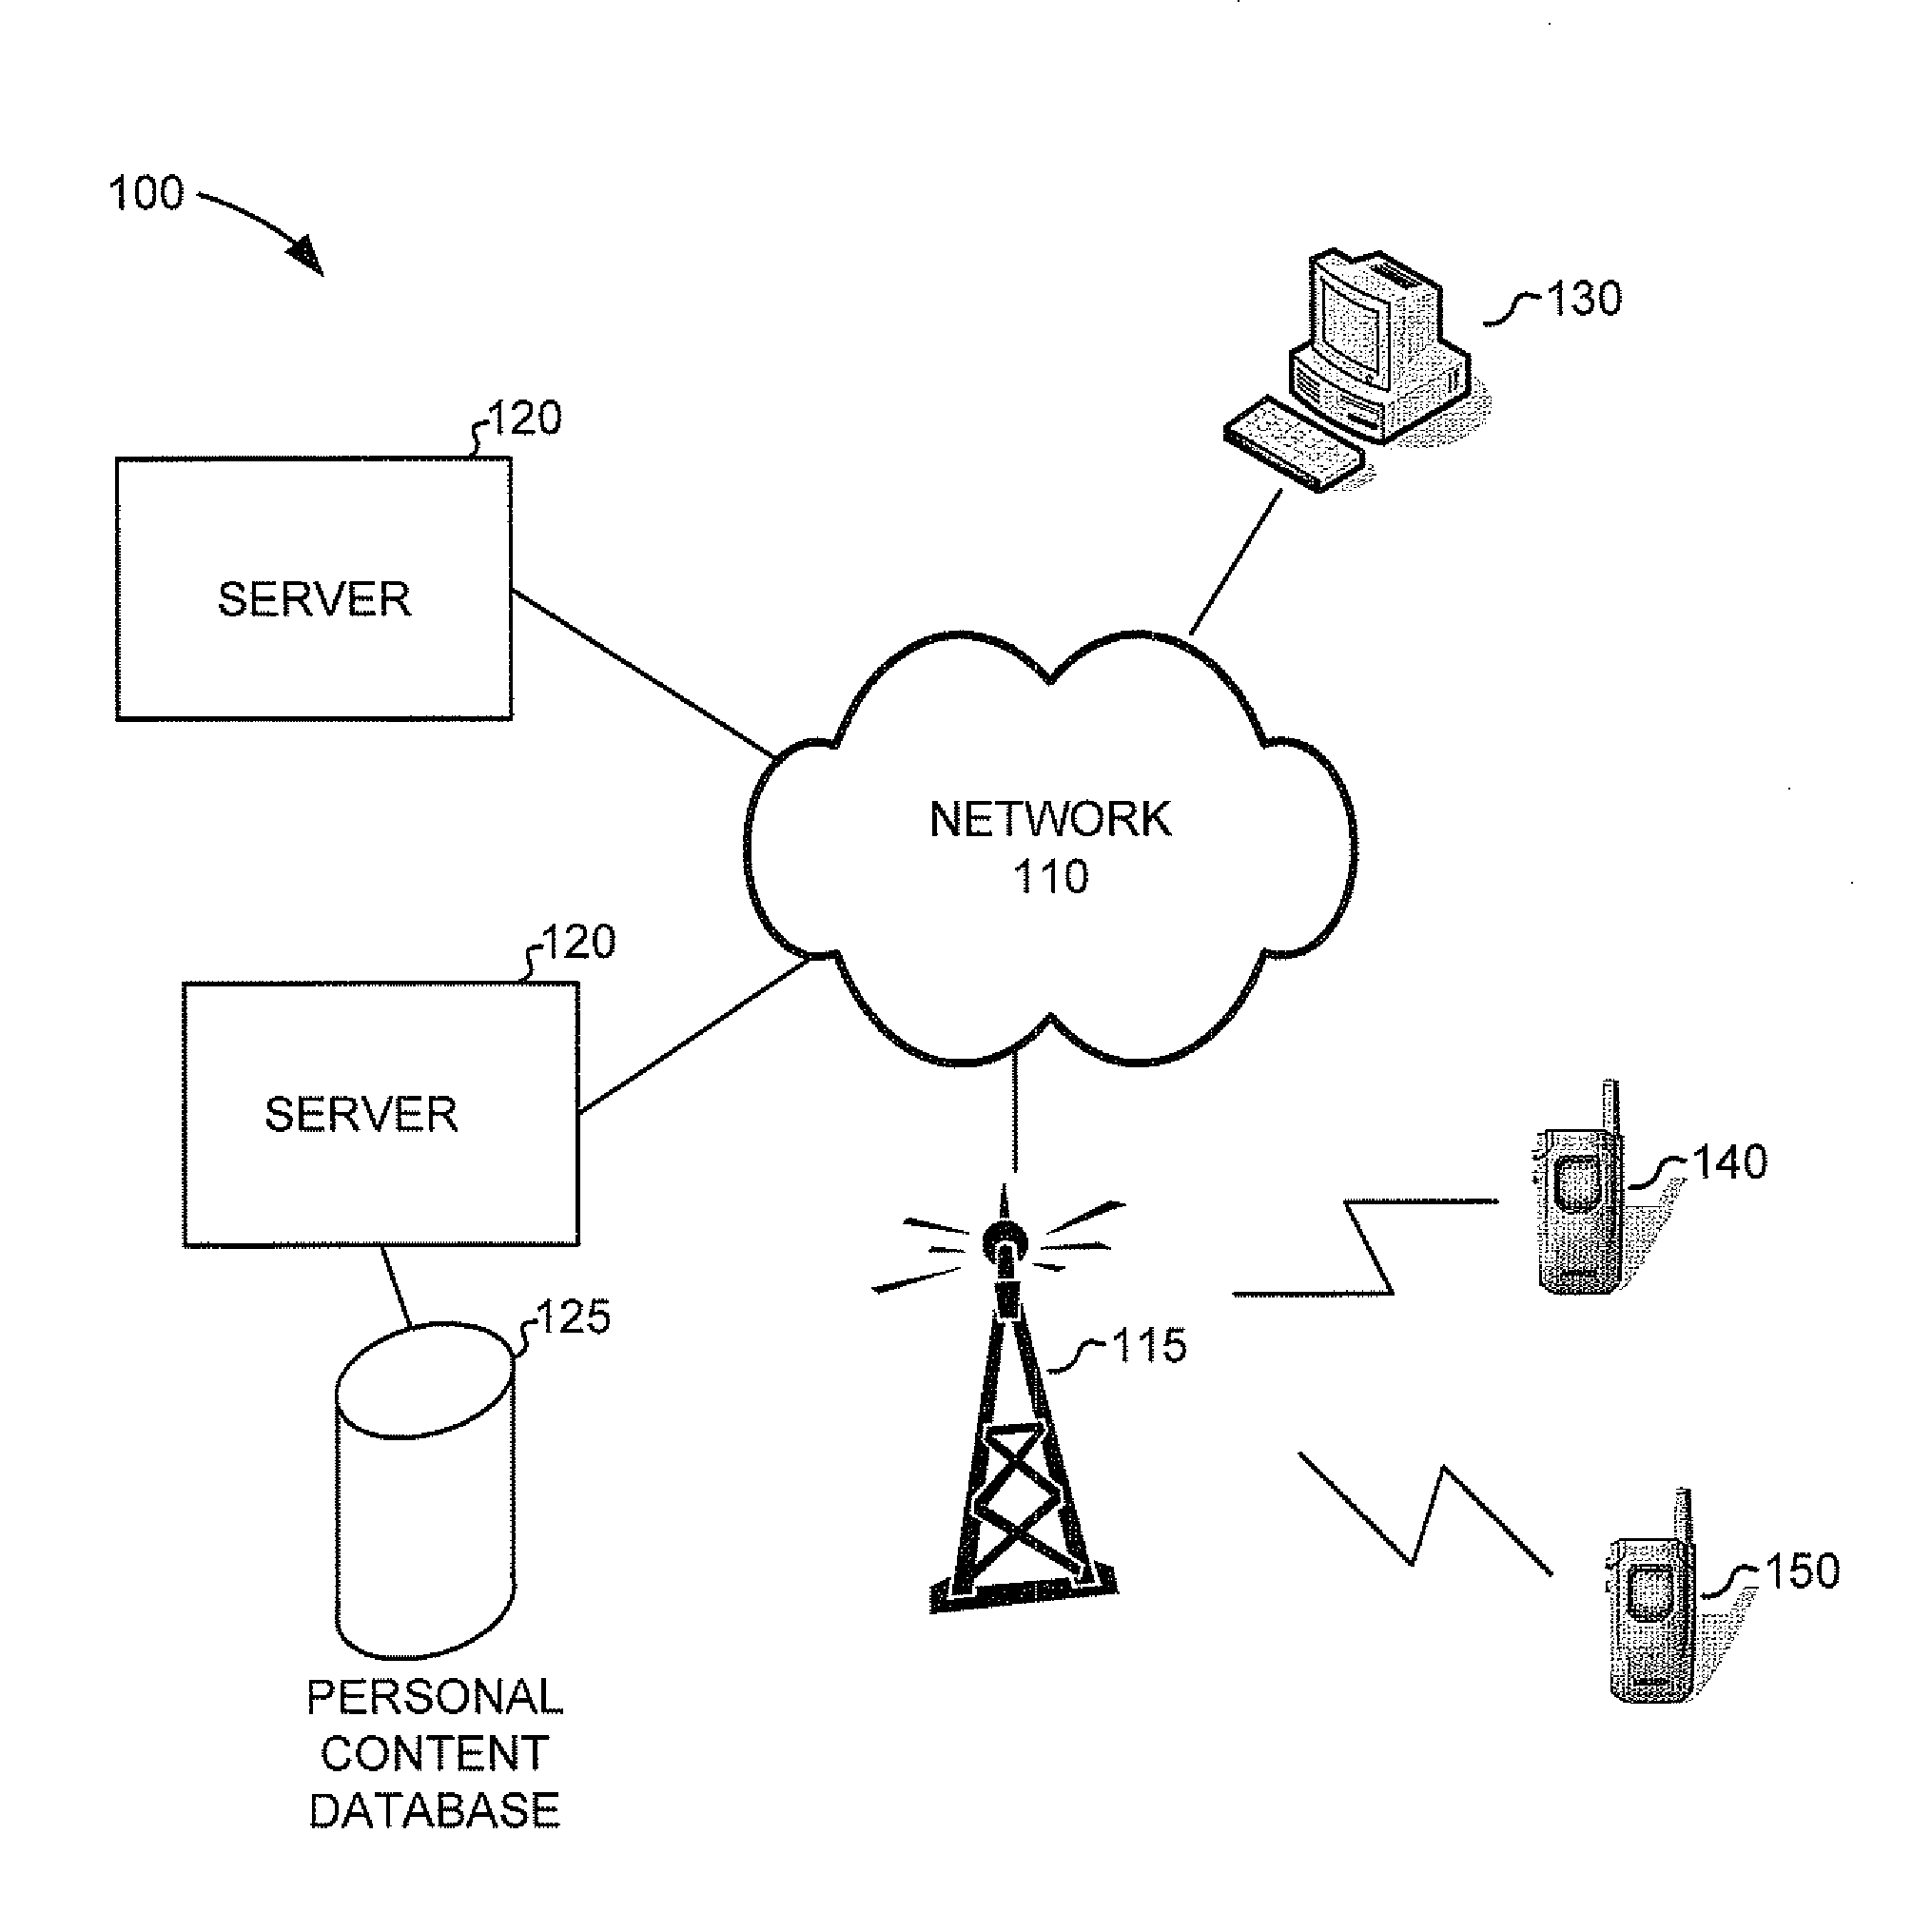 Graphical flash view of documents for data navigation on a touch-screen device